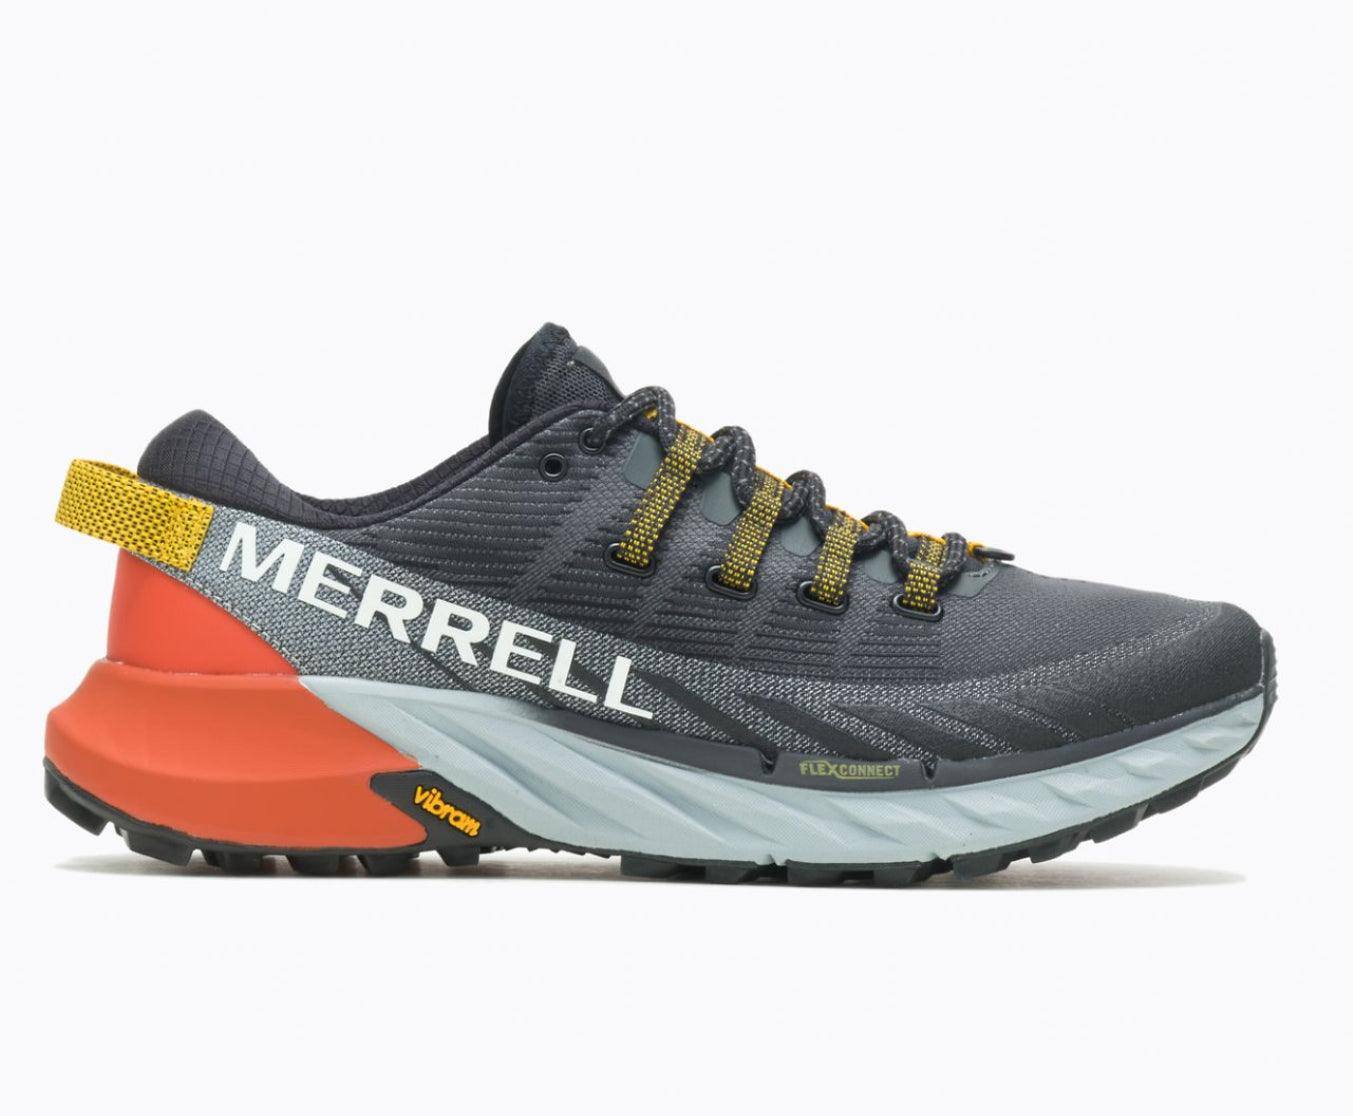 Mens Agility Peak 4 Running Shoes - The Shoe CollectiveMerrell